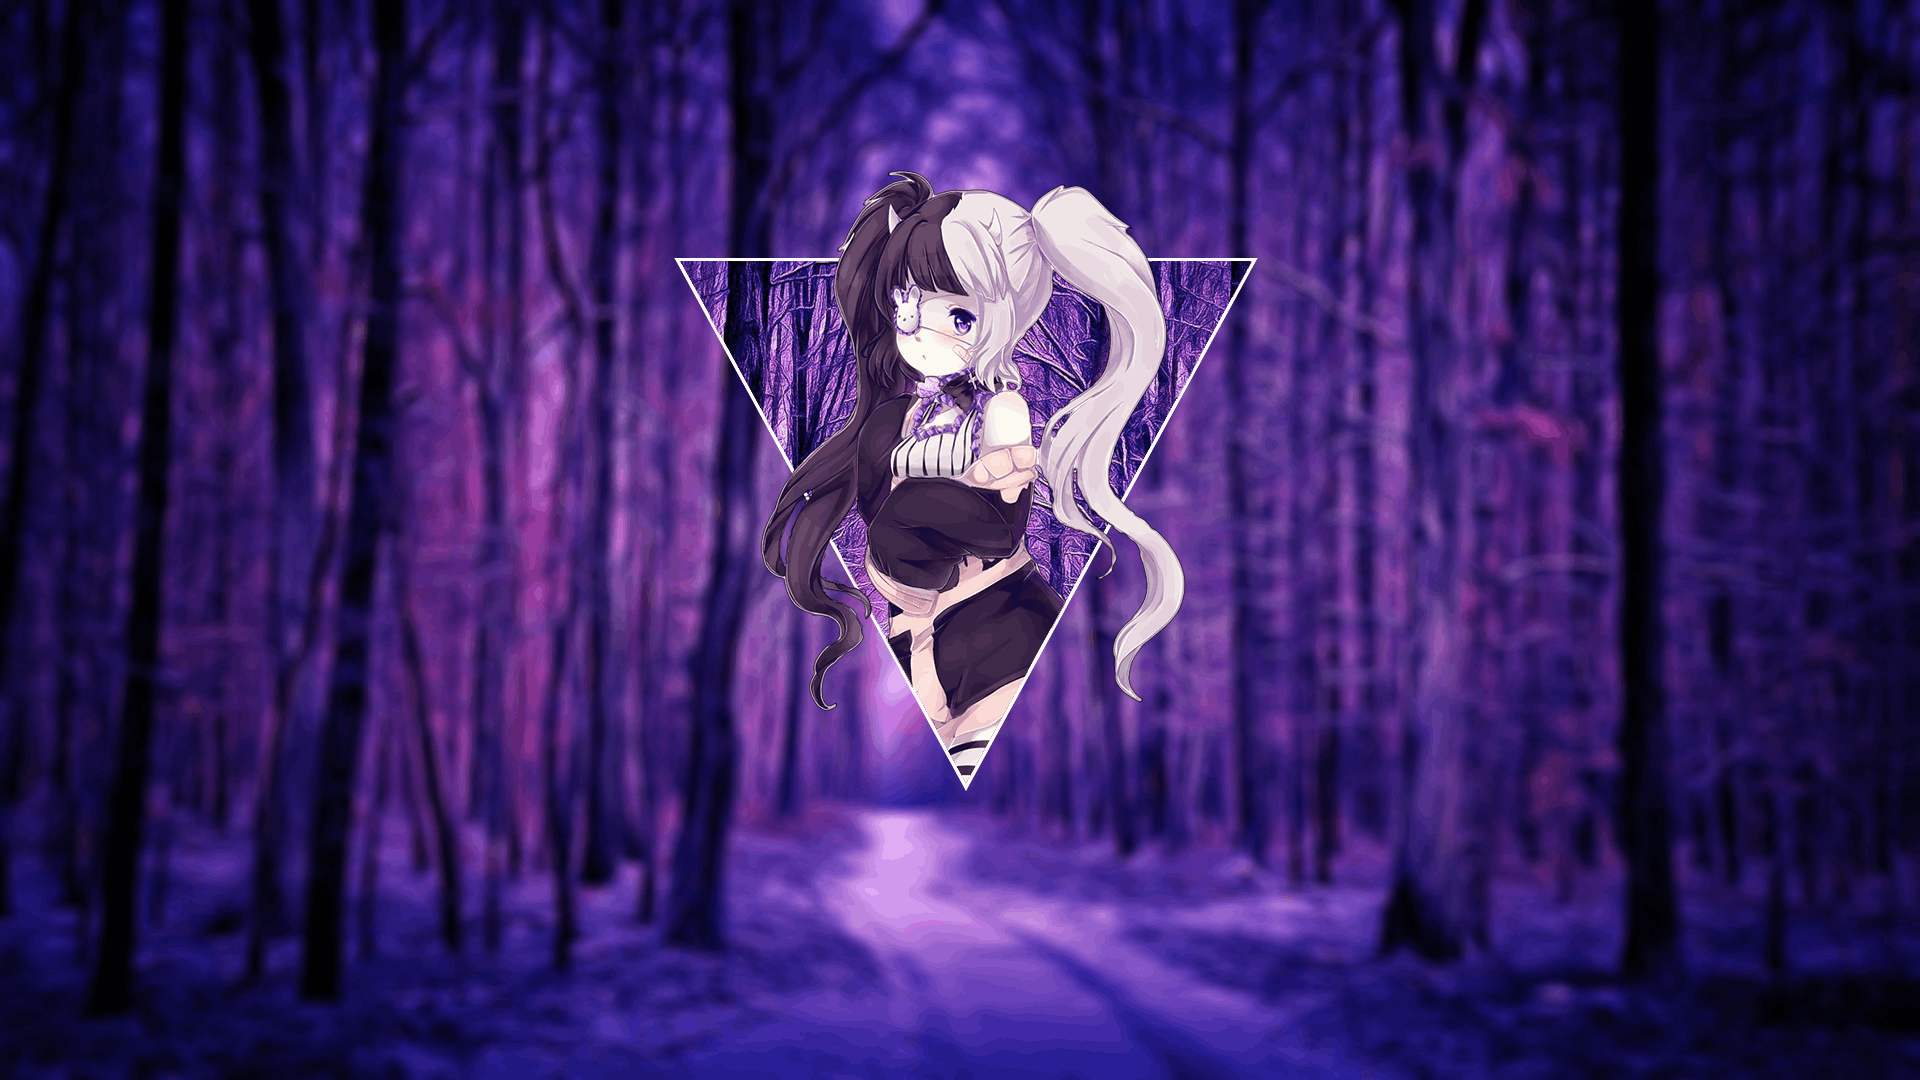 Purple Anime Aesthetic Wallpaper Pc Anime Aesthetic Desktop Wallpaper Novocom Top, anime can be safely called an independent style, because it includes countless arts, as well as computer